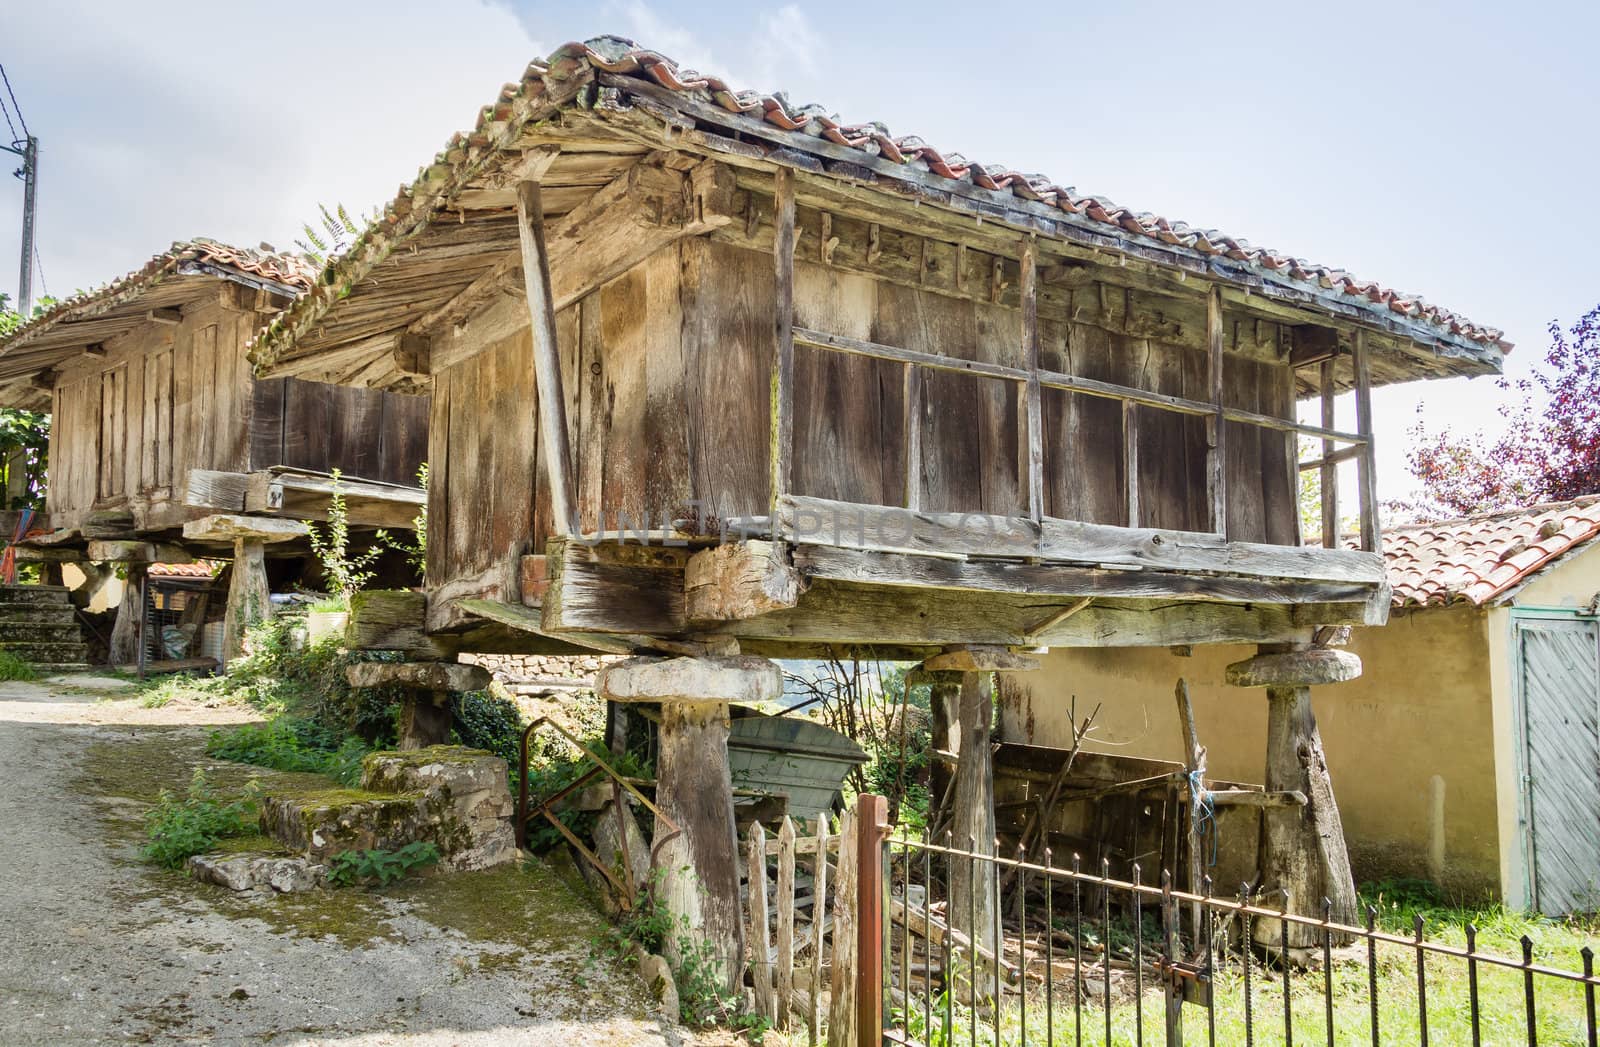 View of typical granary of Asturias, in Spain, raised by stone pillars and known as "horreo"